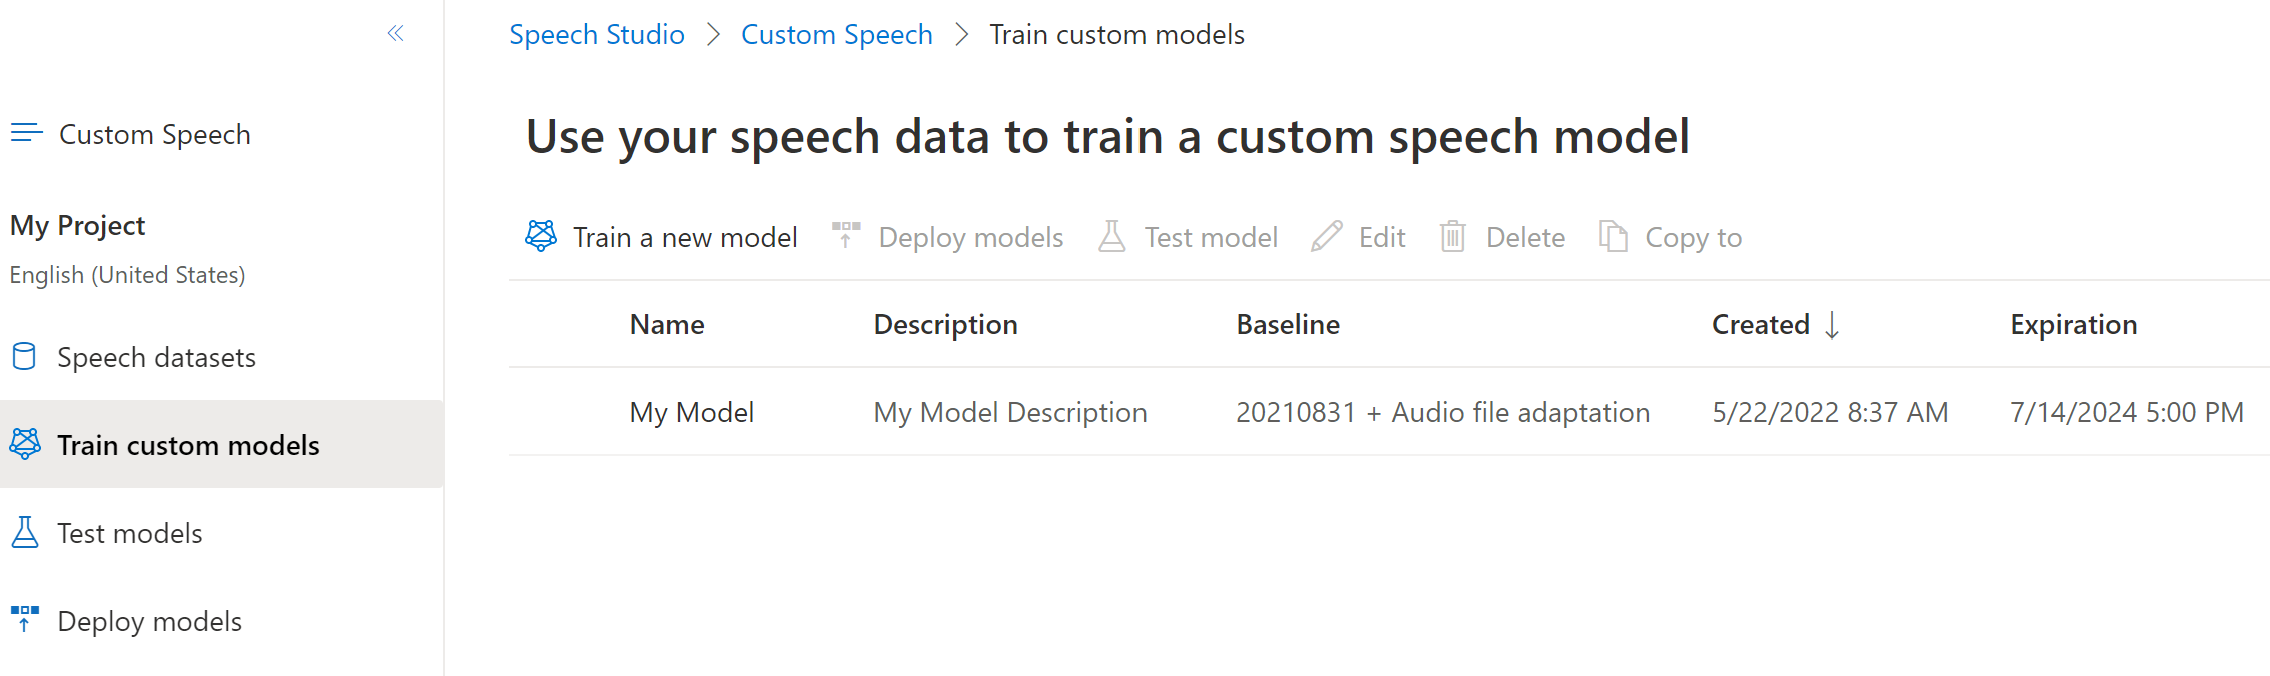 Screenshot of the train custom models page that shows the transcription expiration date.